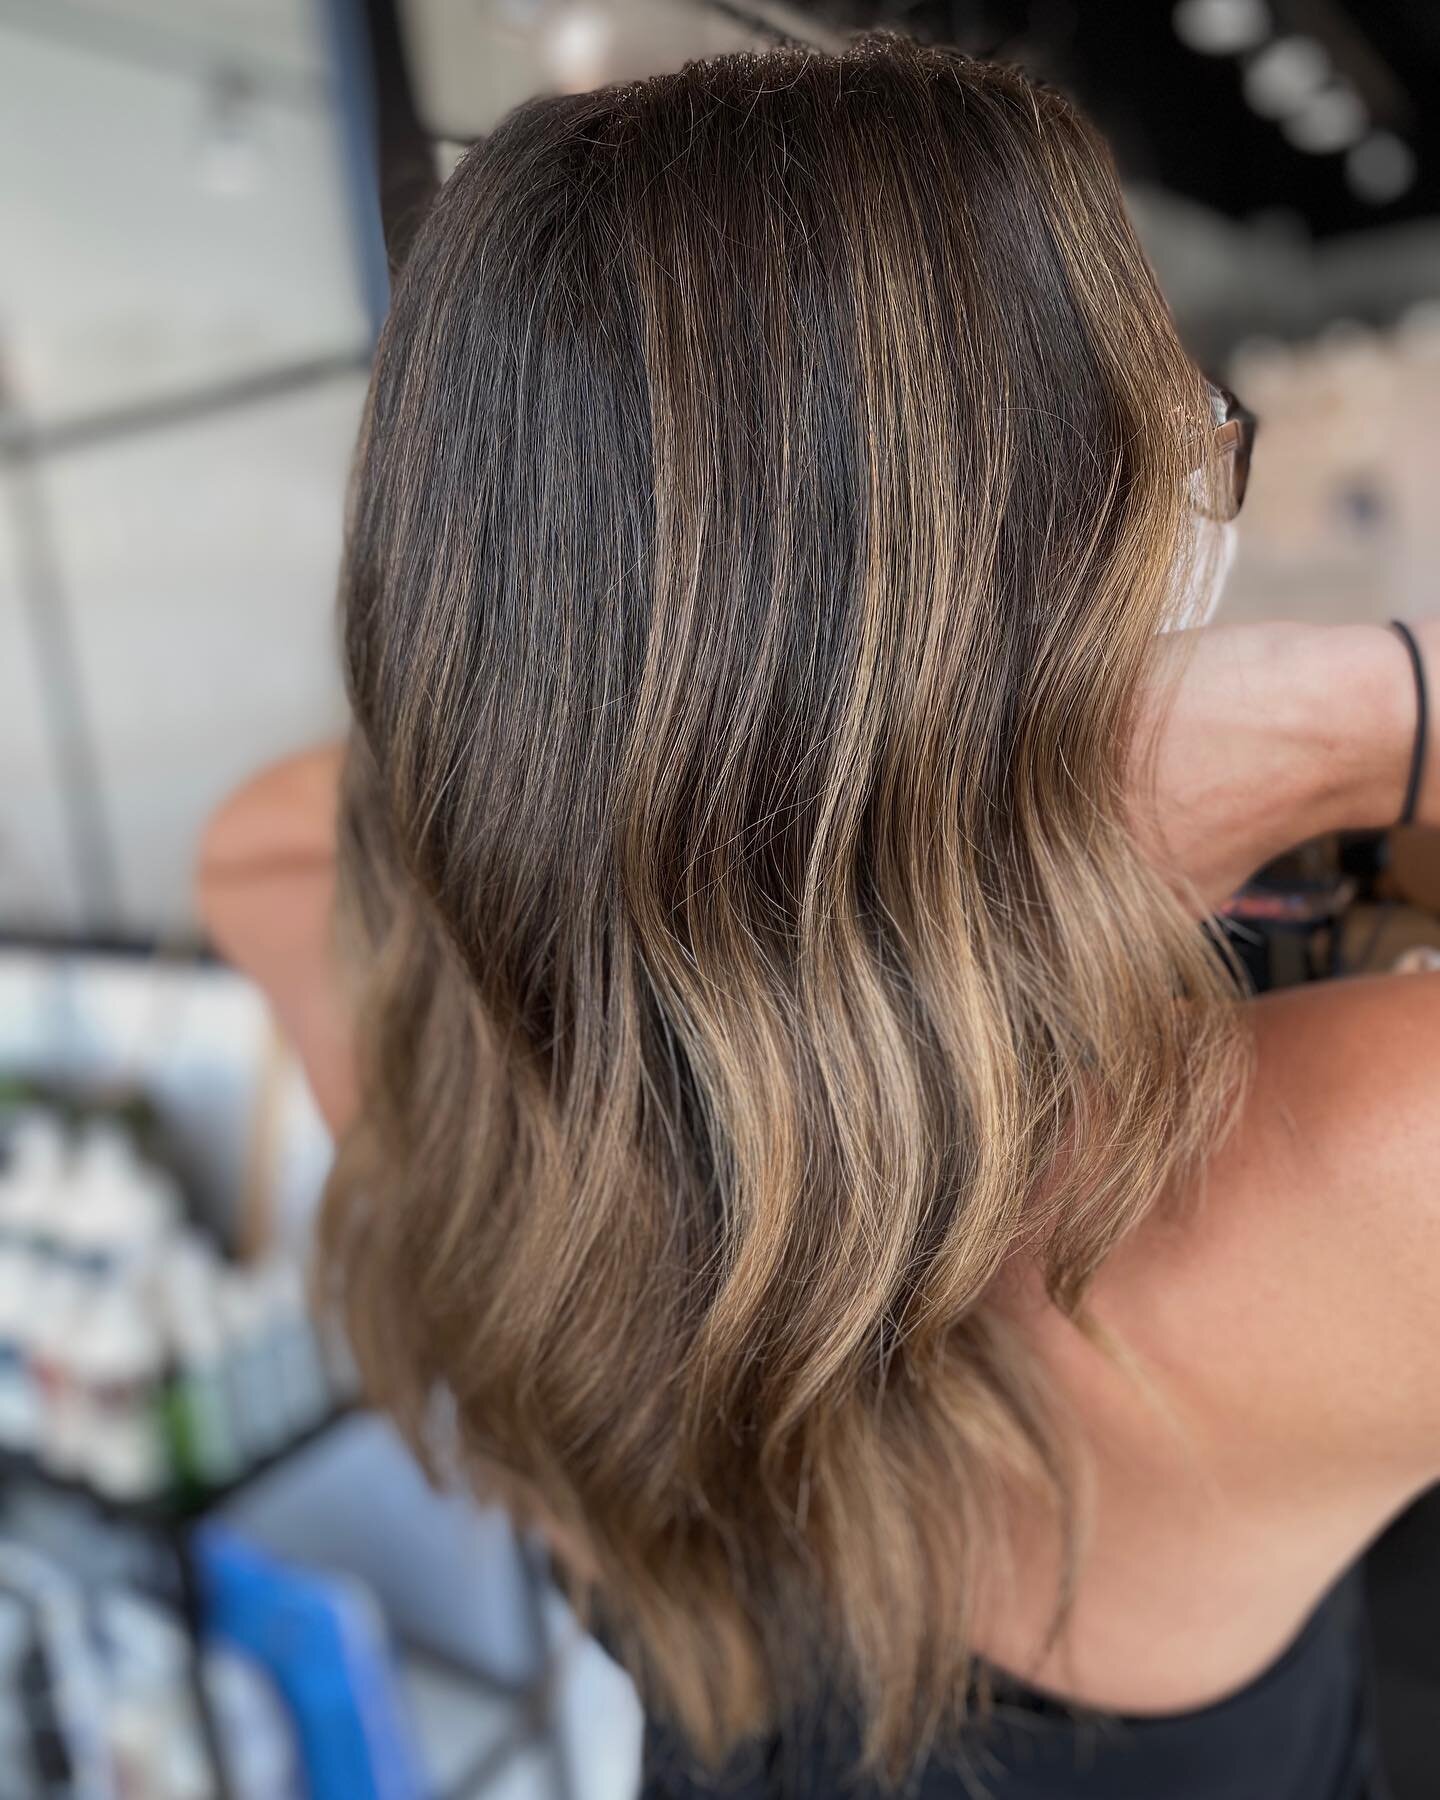 Ribbons of color to make those brunettes pop.  Hair by Chantelle @chantelledidit #staybabes #chantelledidit #yeghair #yegbalayage #brunettebalayage #brunettewithhighlights #carmelhighlights